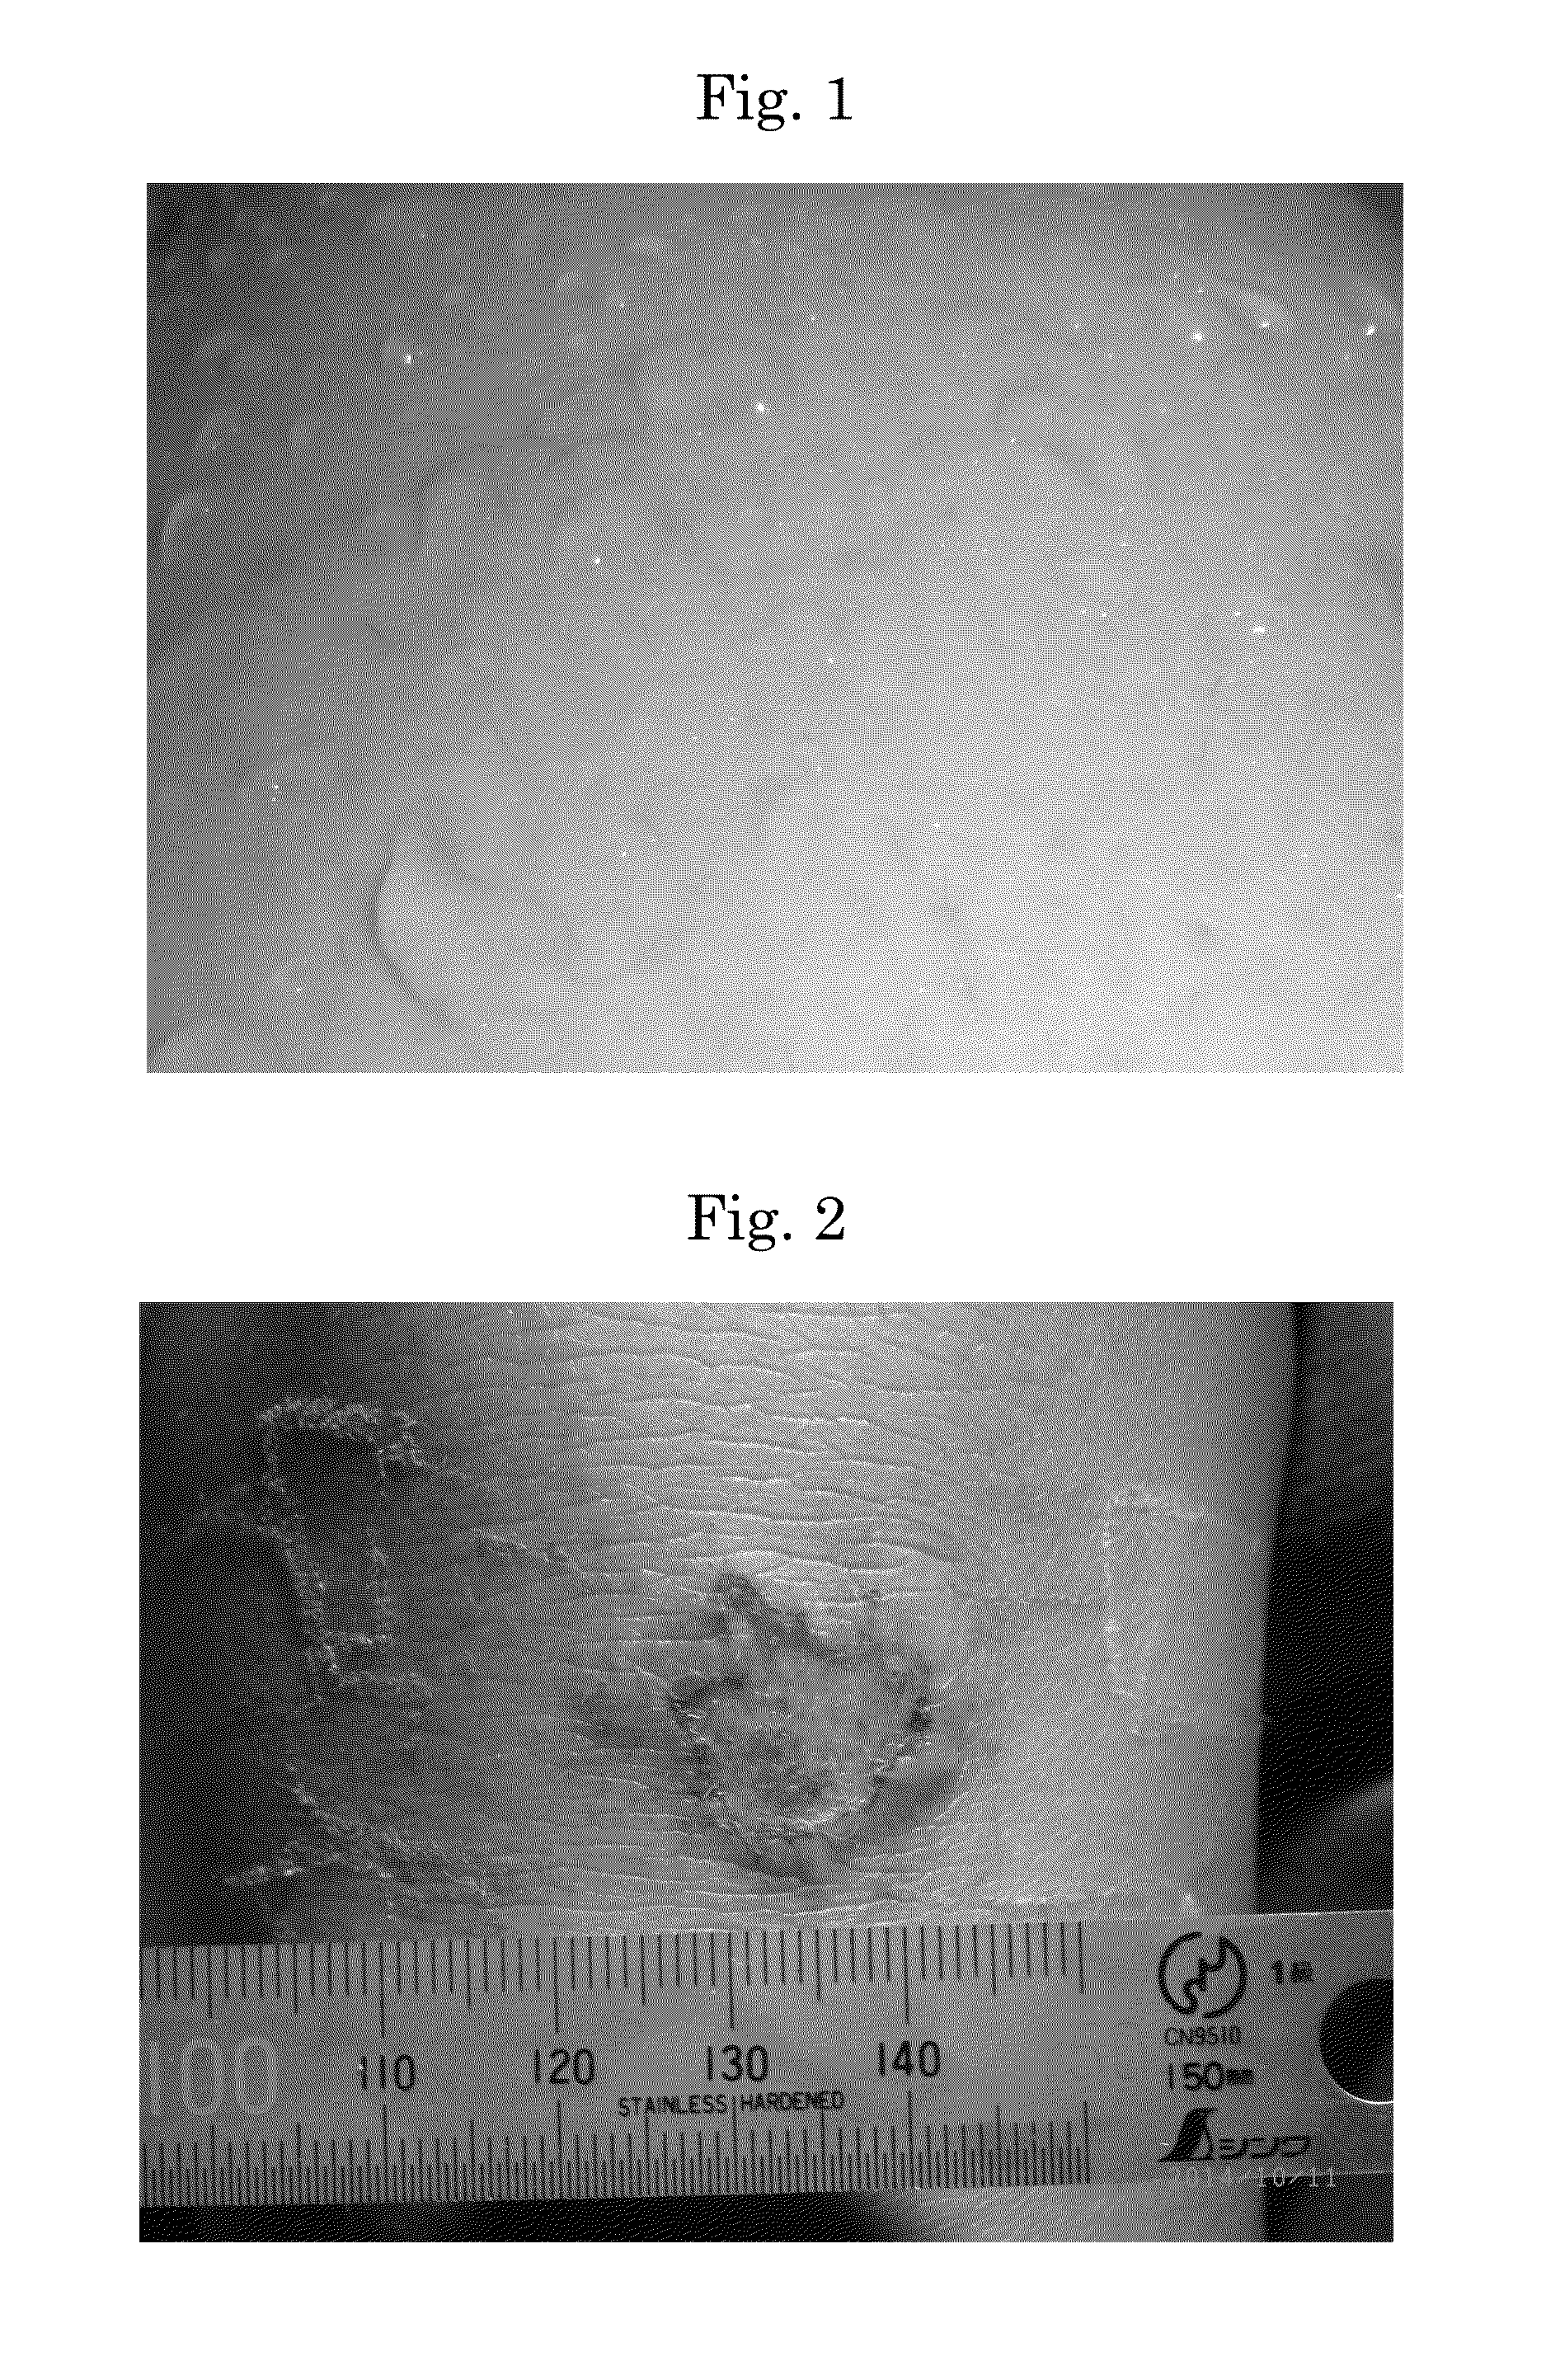 Biological film-forming agent for facilitation of wound healing and coating and protection of biological organs